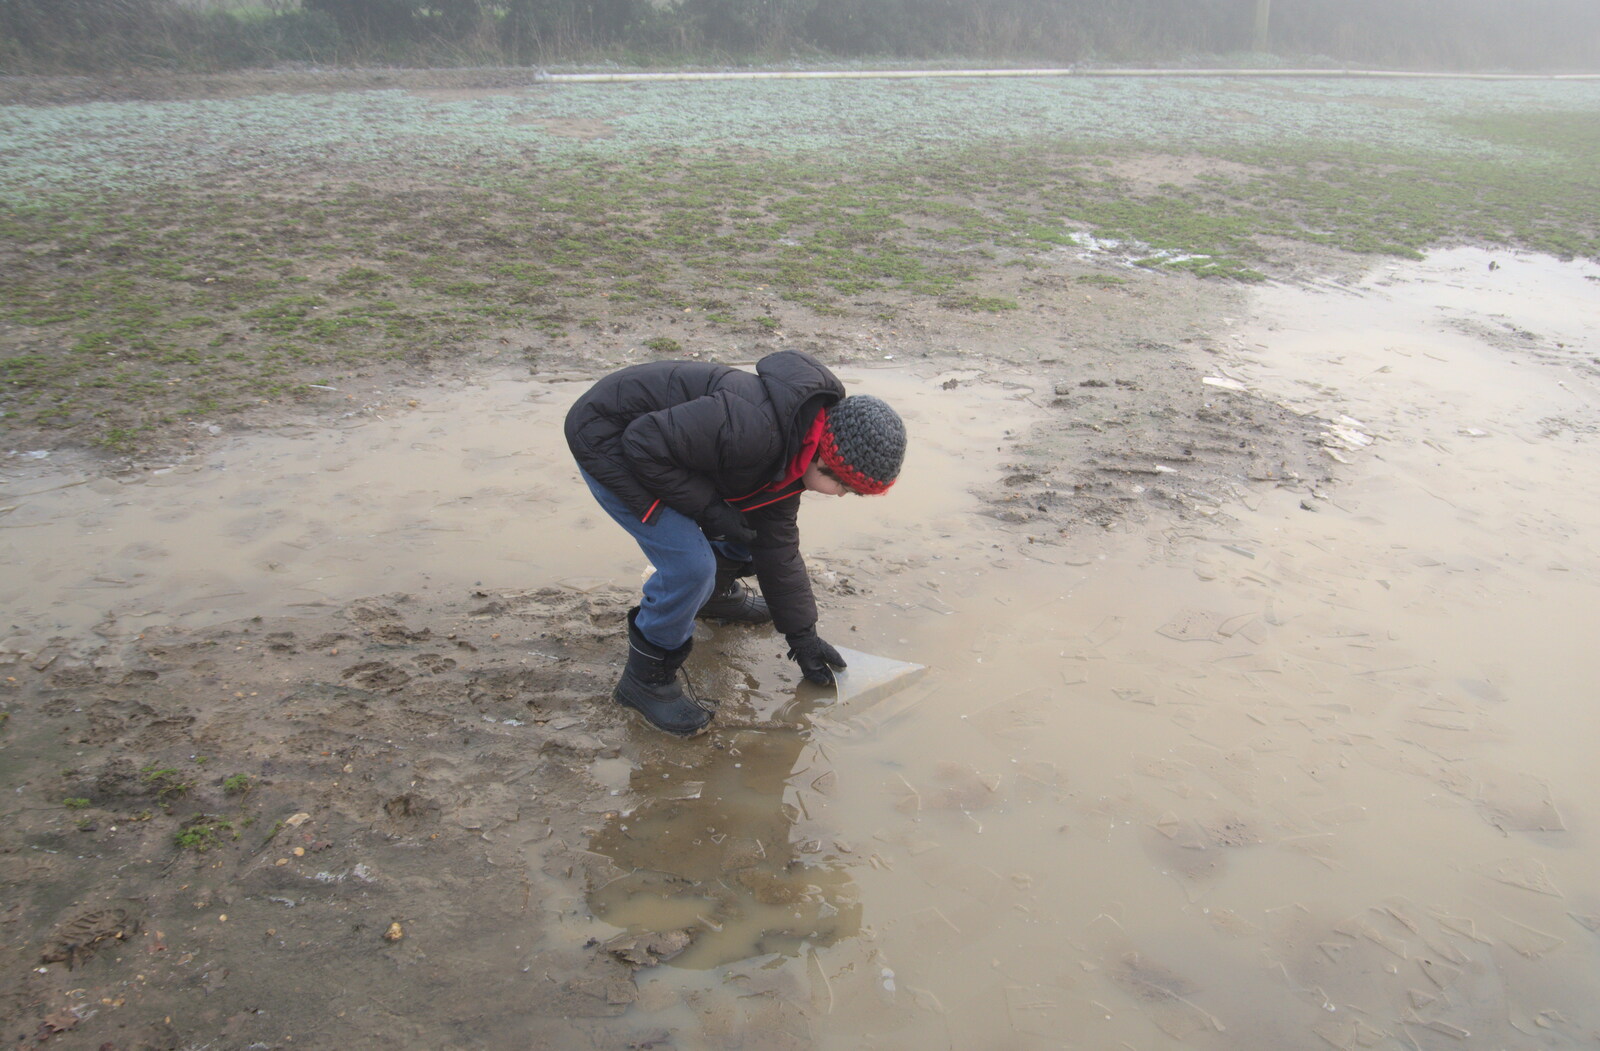 Fred pokes some ice around from Fun With Ice in Lockdown, Brome, Suffolk - 10th January 2021